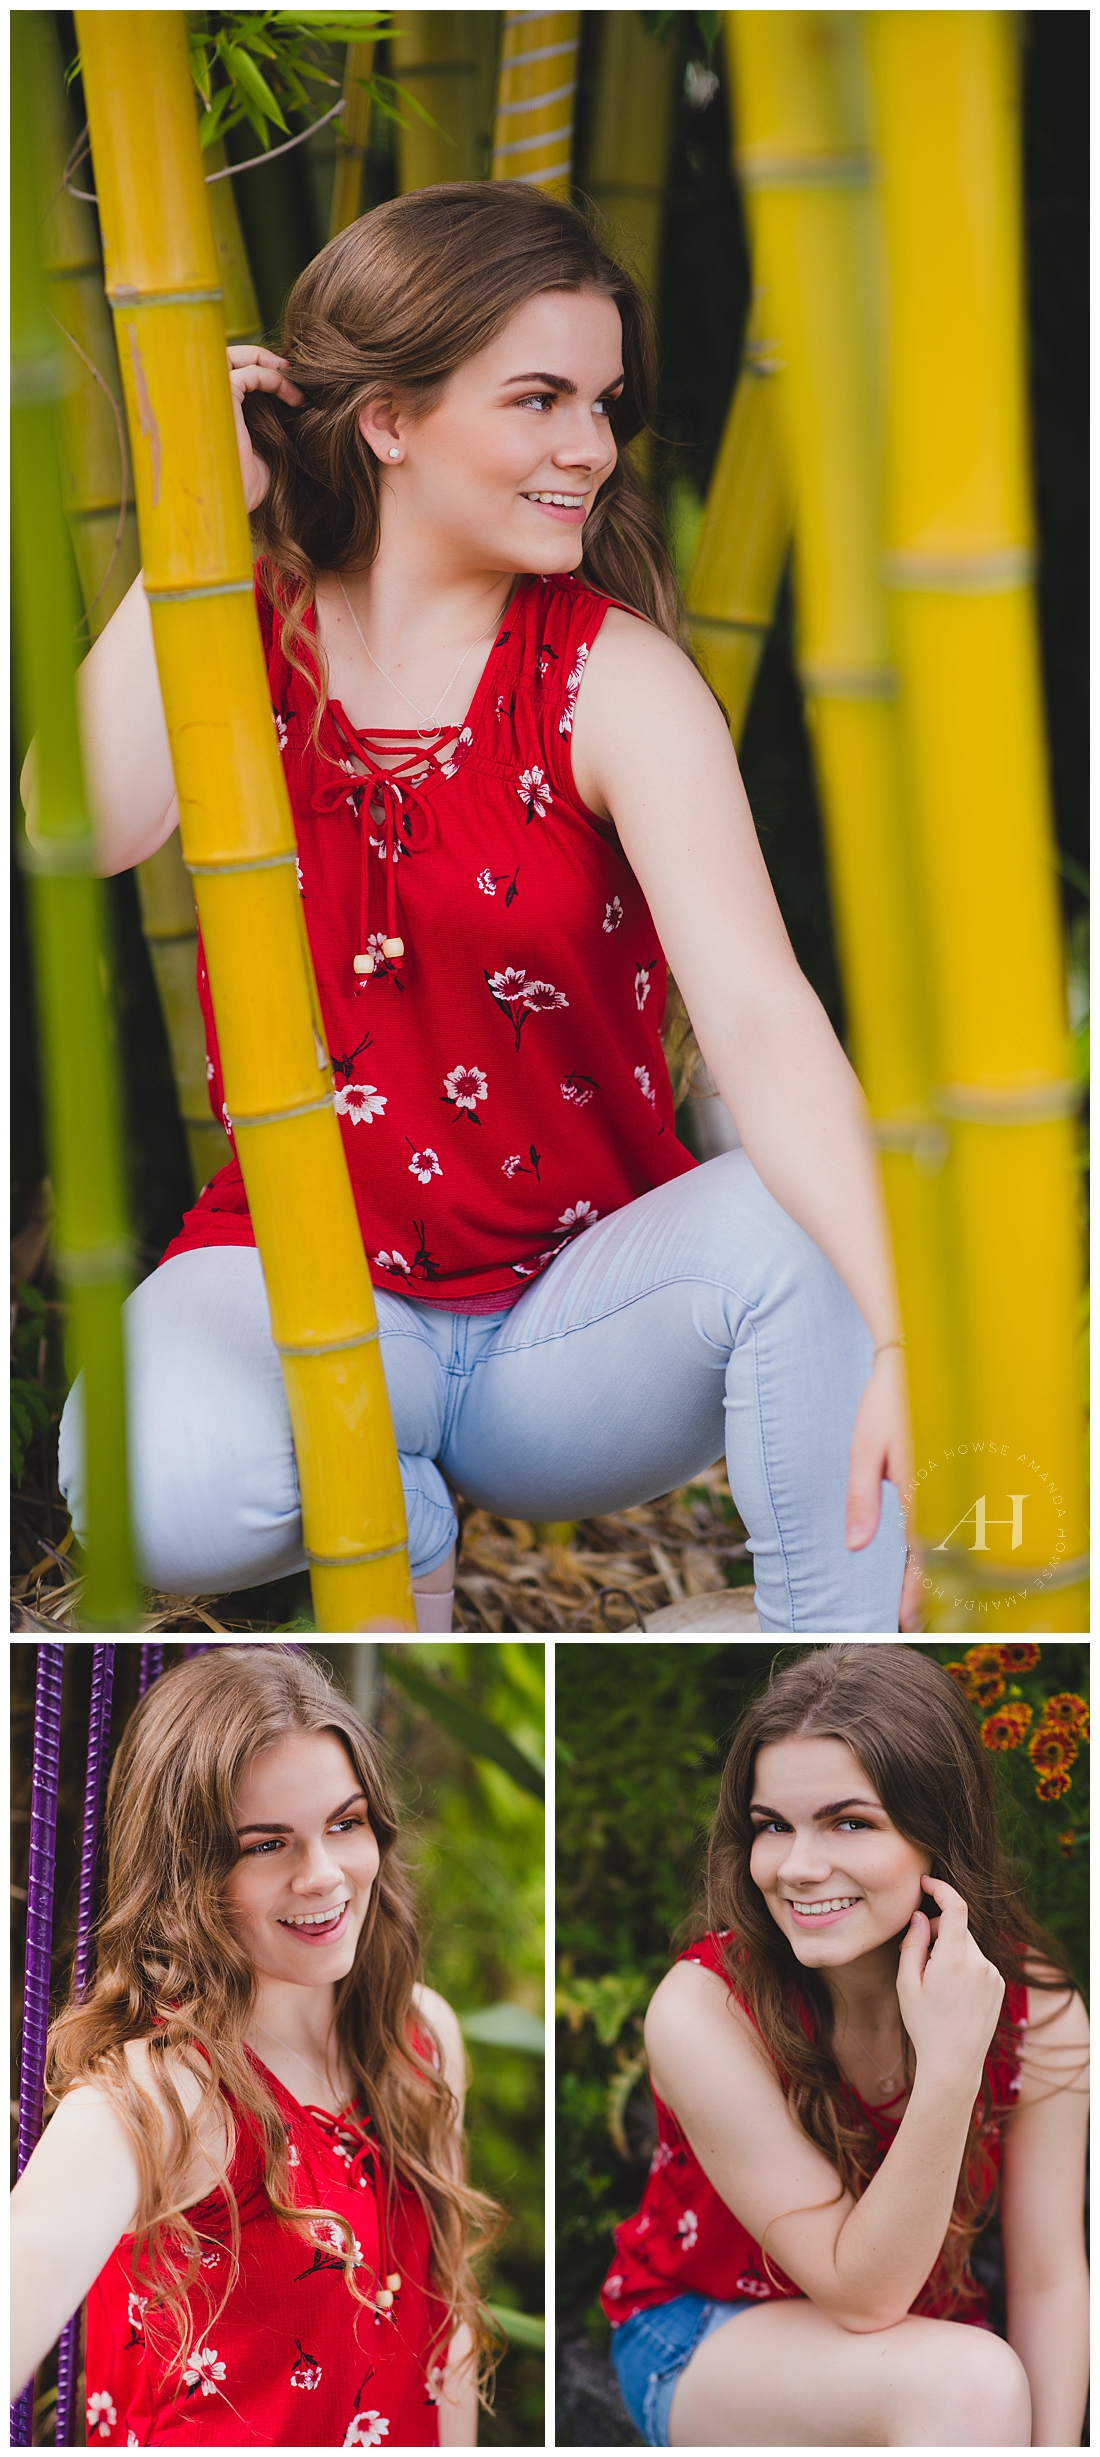 Senior Portraits with Bamboo Stalks | Boho Garden Senior Portraits | Photographed by the Best Tacoma Senior Portrait Photographer Amanda Howse